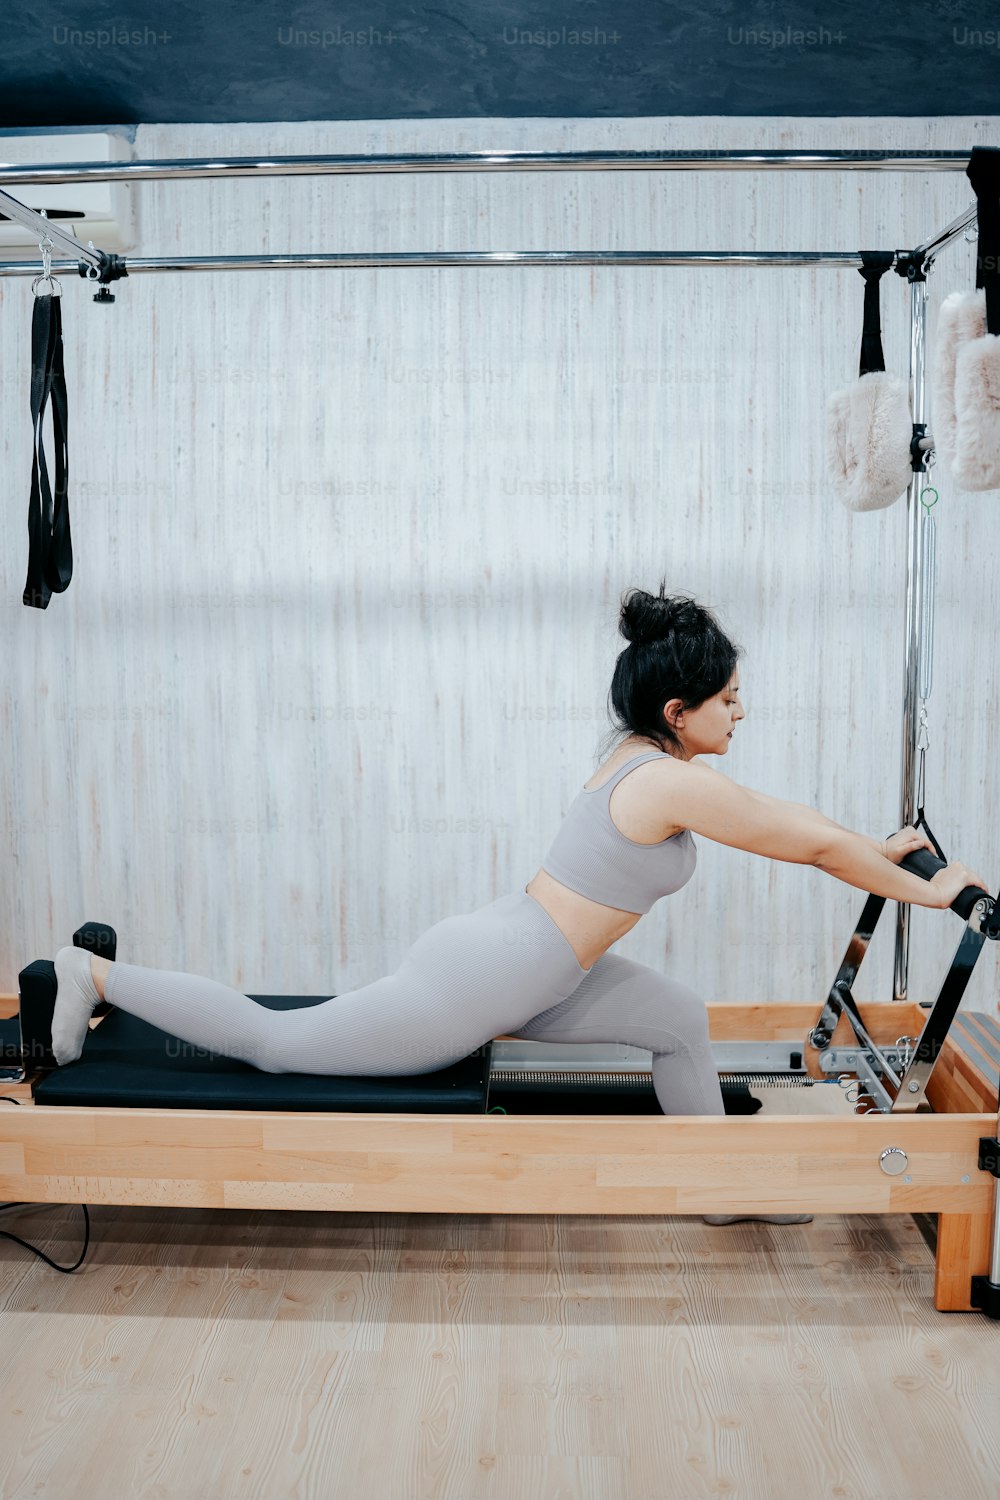 a woman in a gray top is on a rowing machine